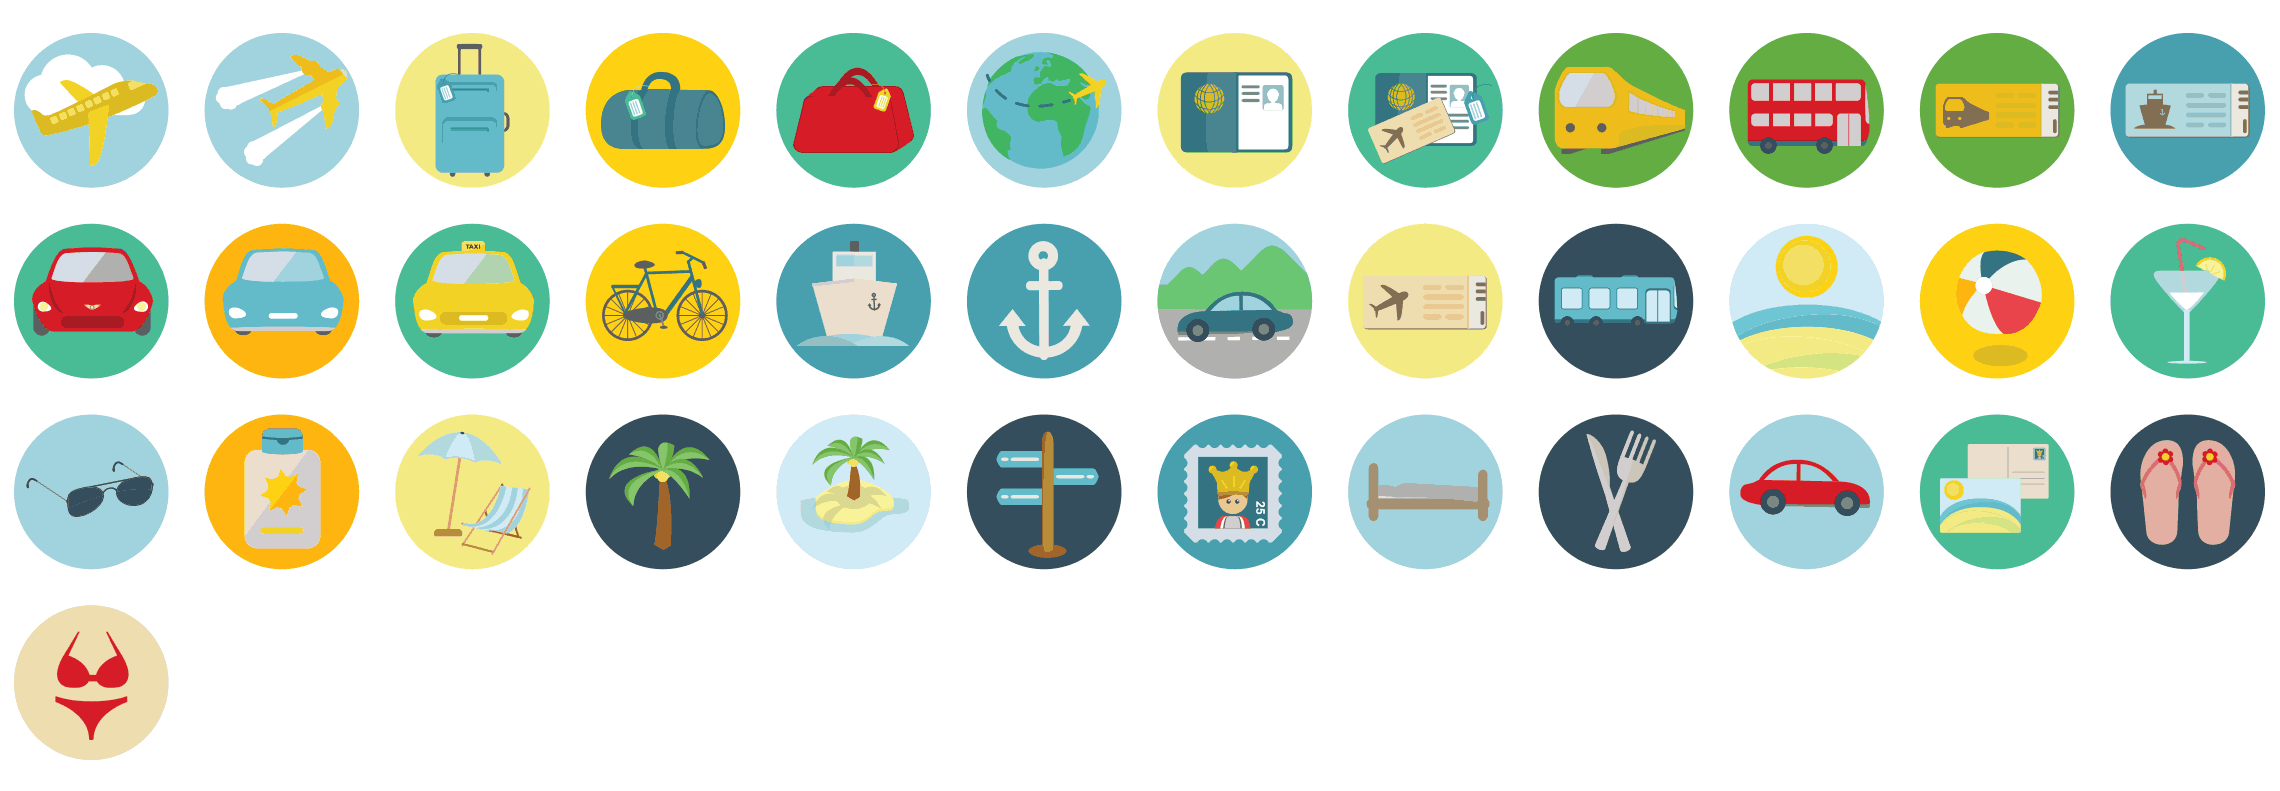 travel-and-transportation-flat-icons-vol-1-preview